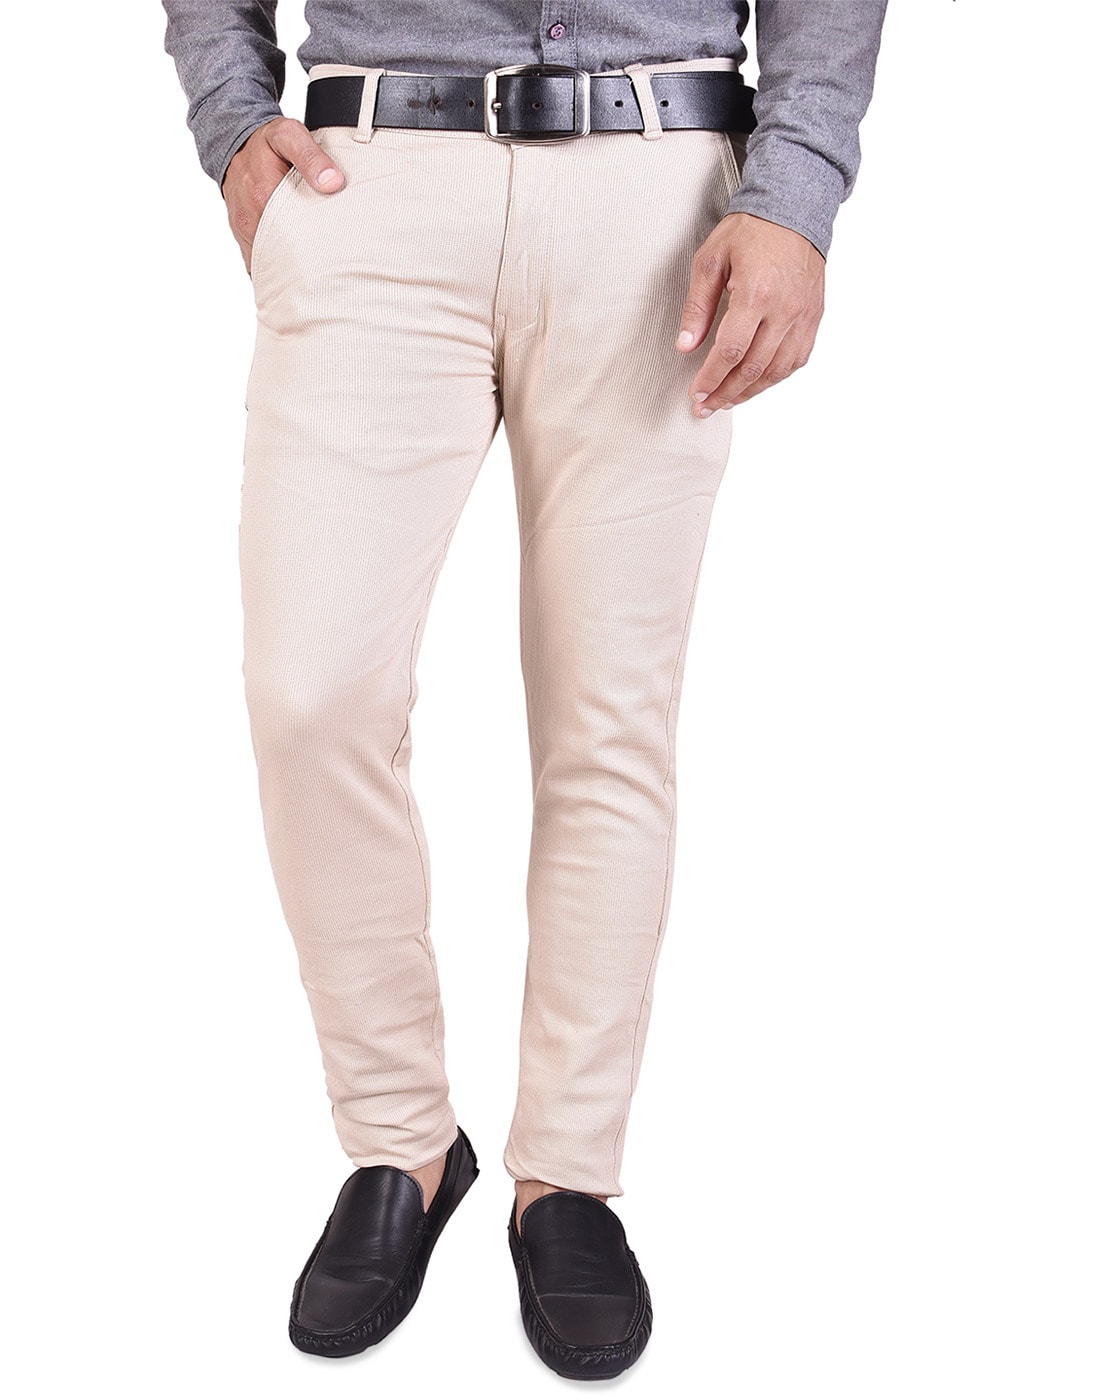 Buy Red Wine Chinos for Men Online in India at Beyoung